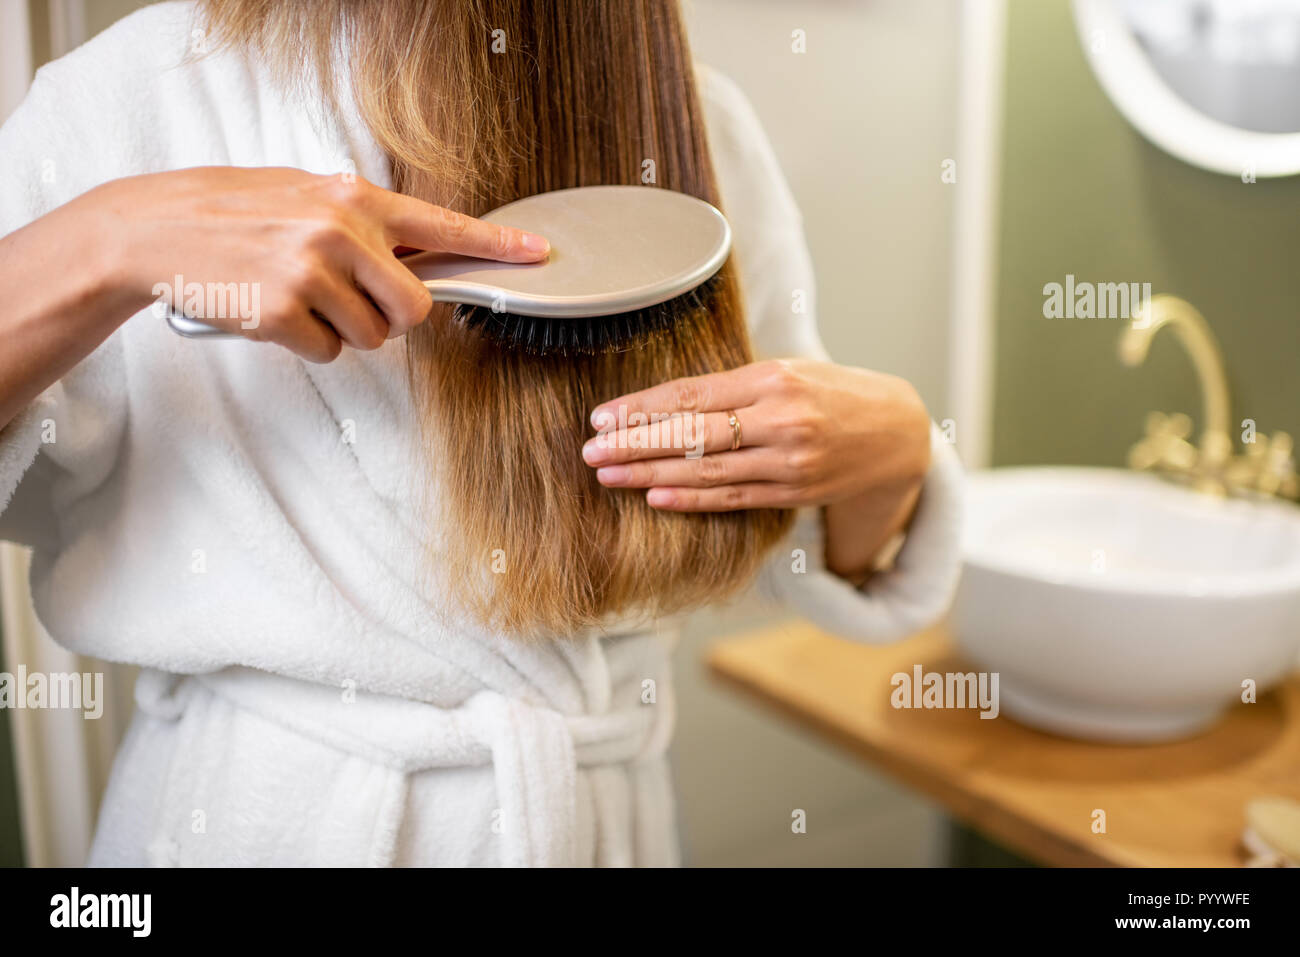 Woman combing hair with brush in the bathroom, close-up view with no face Stock Photo